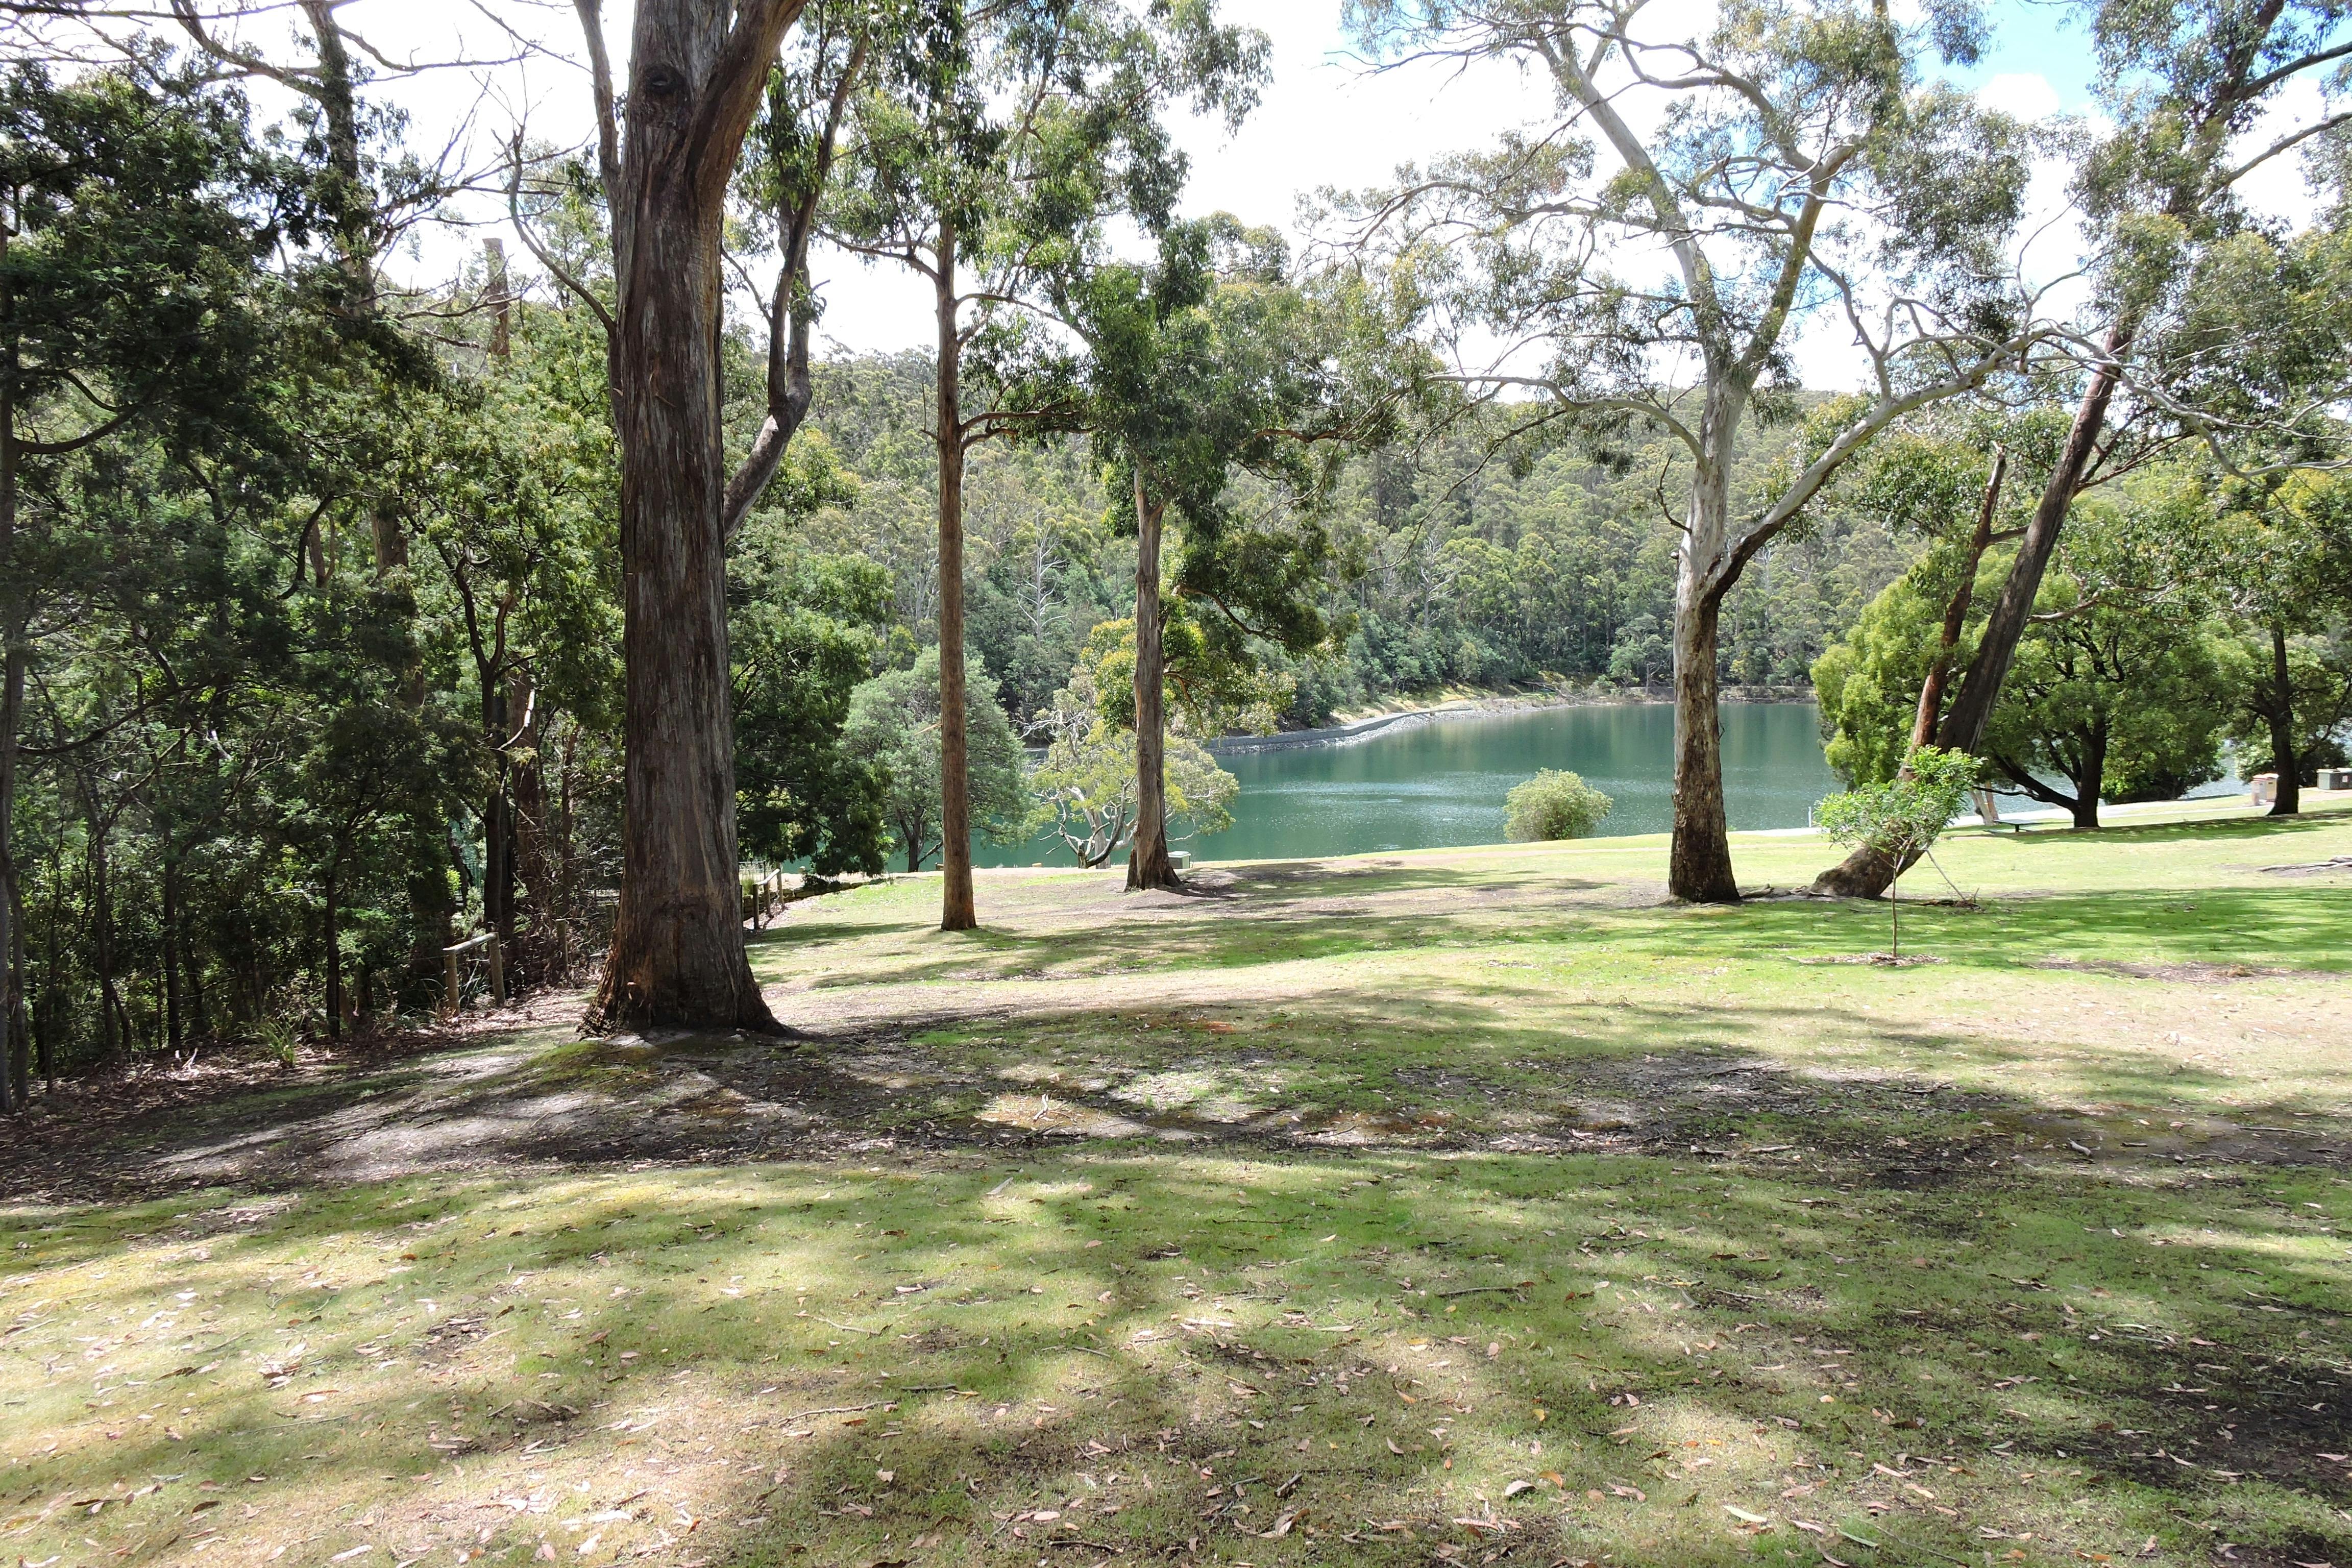 View through the trees down to the water of Waterworks Reserve